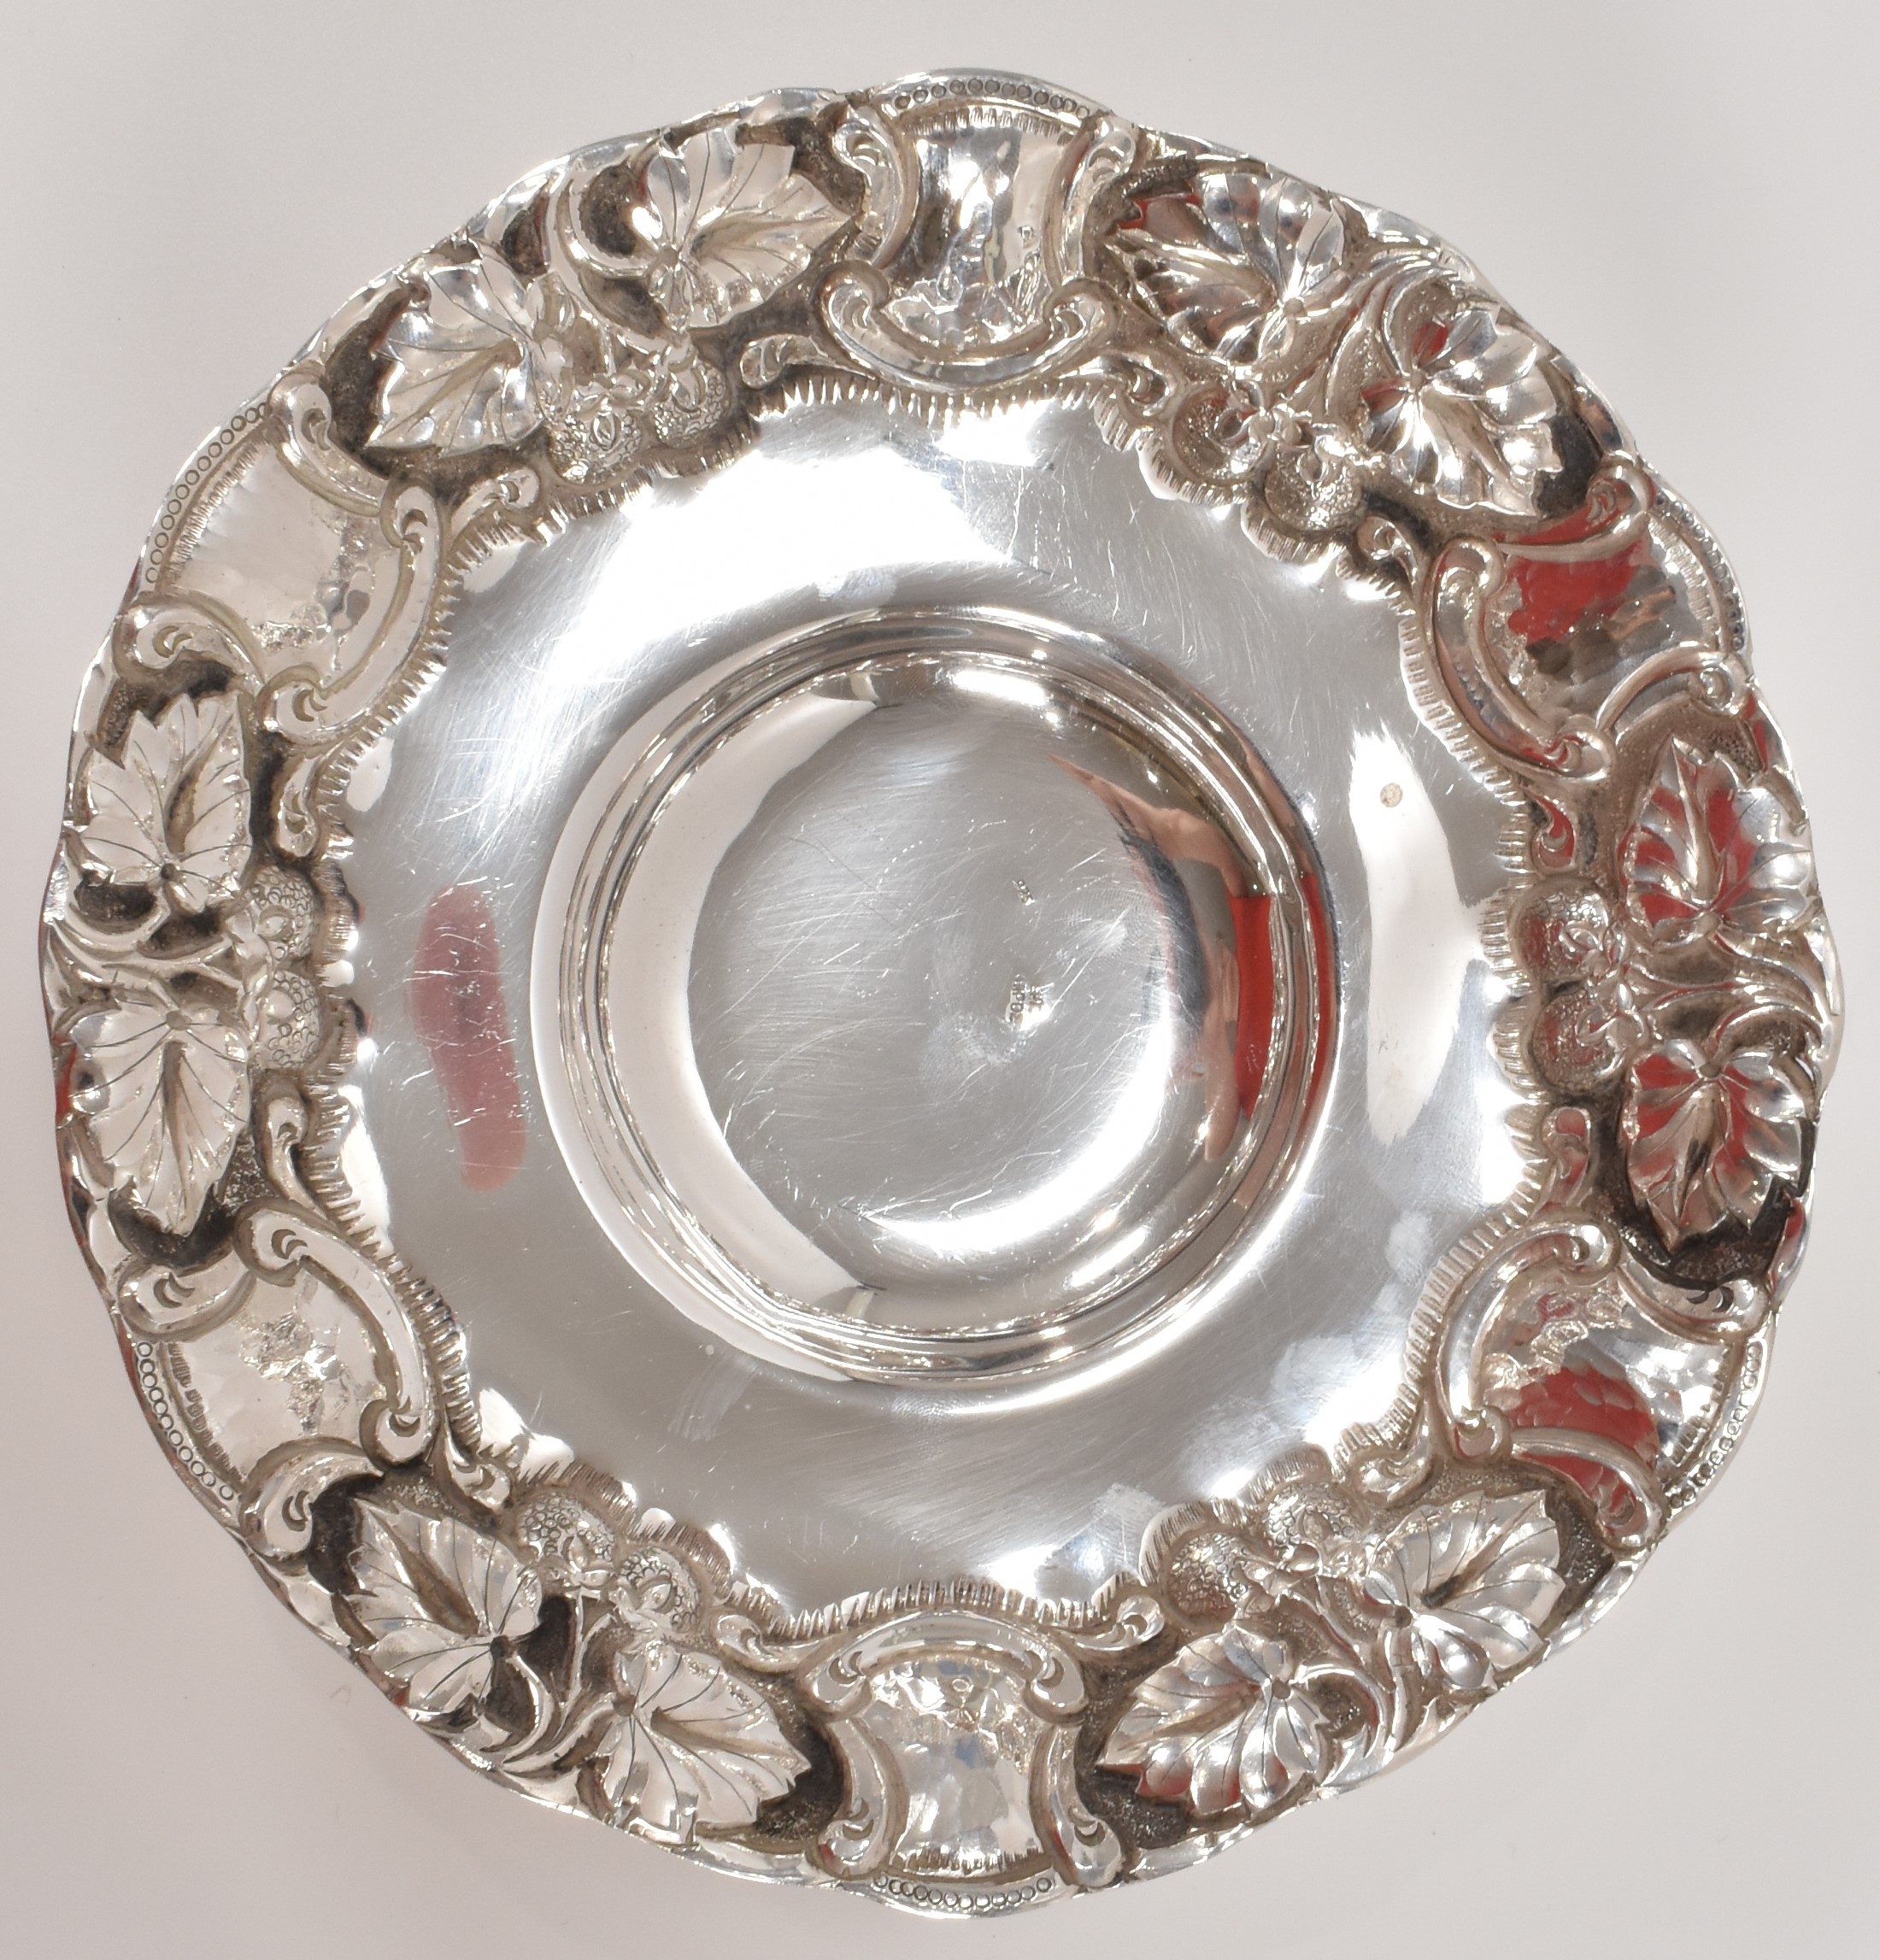 SILVER REPOUSSE STRAWBERRY DISH - Image 4 of 4